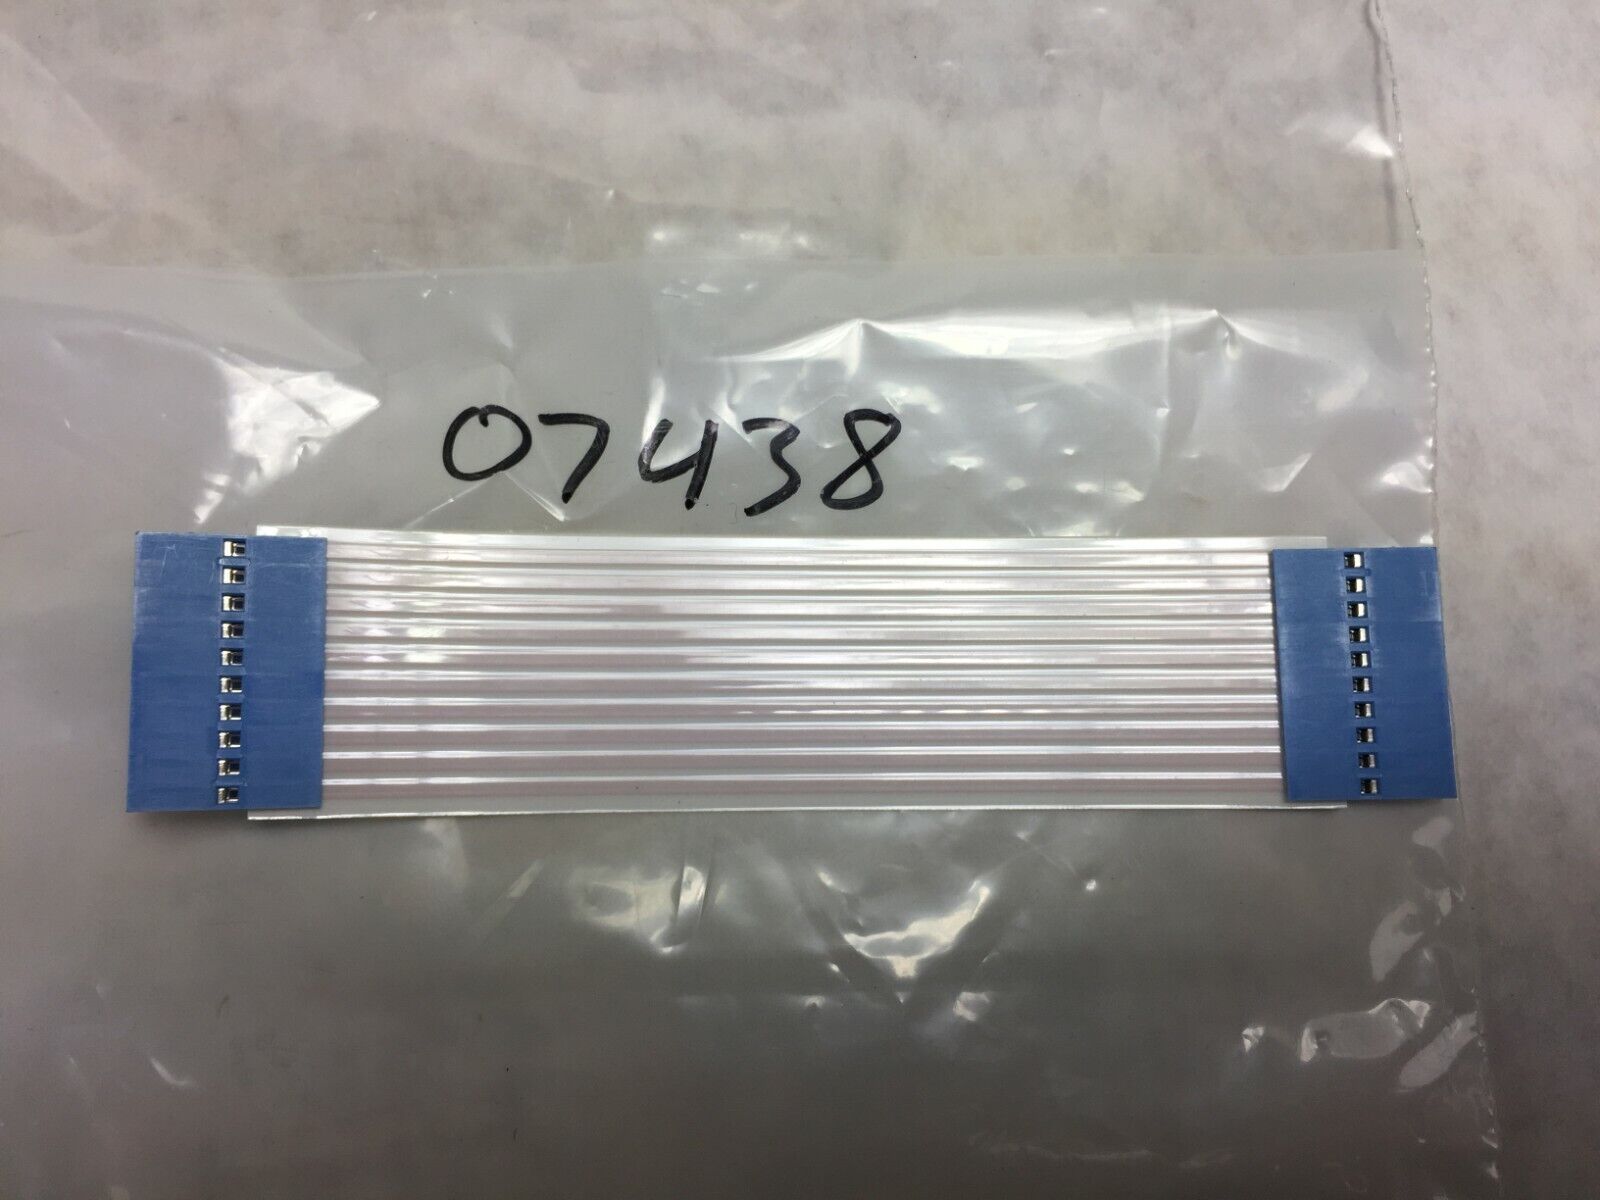 Ribbon Cable 07438  2399    NOS